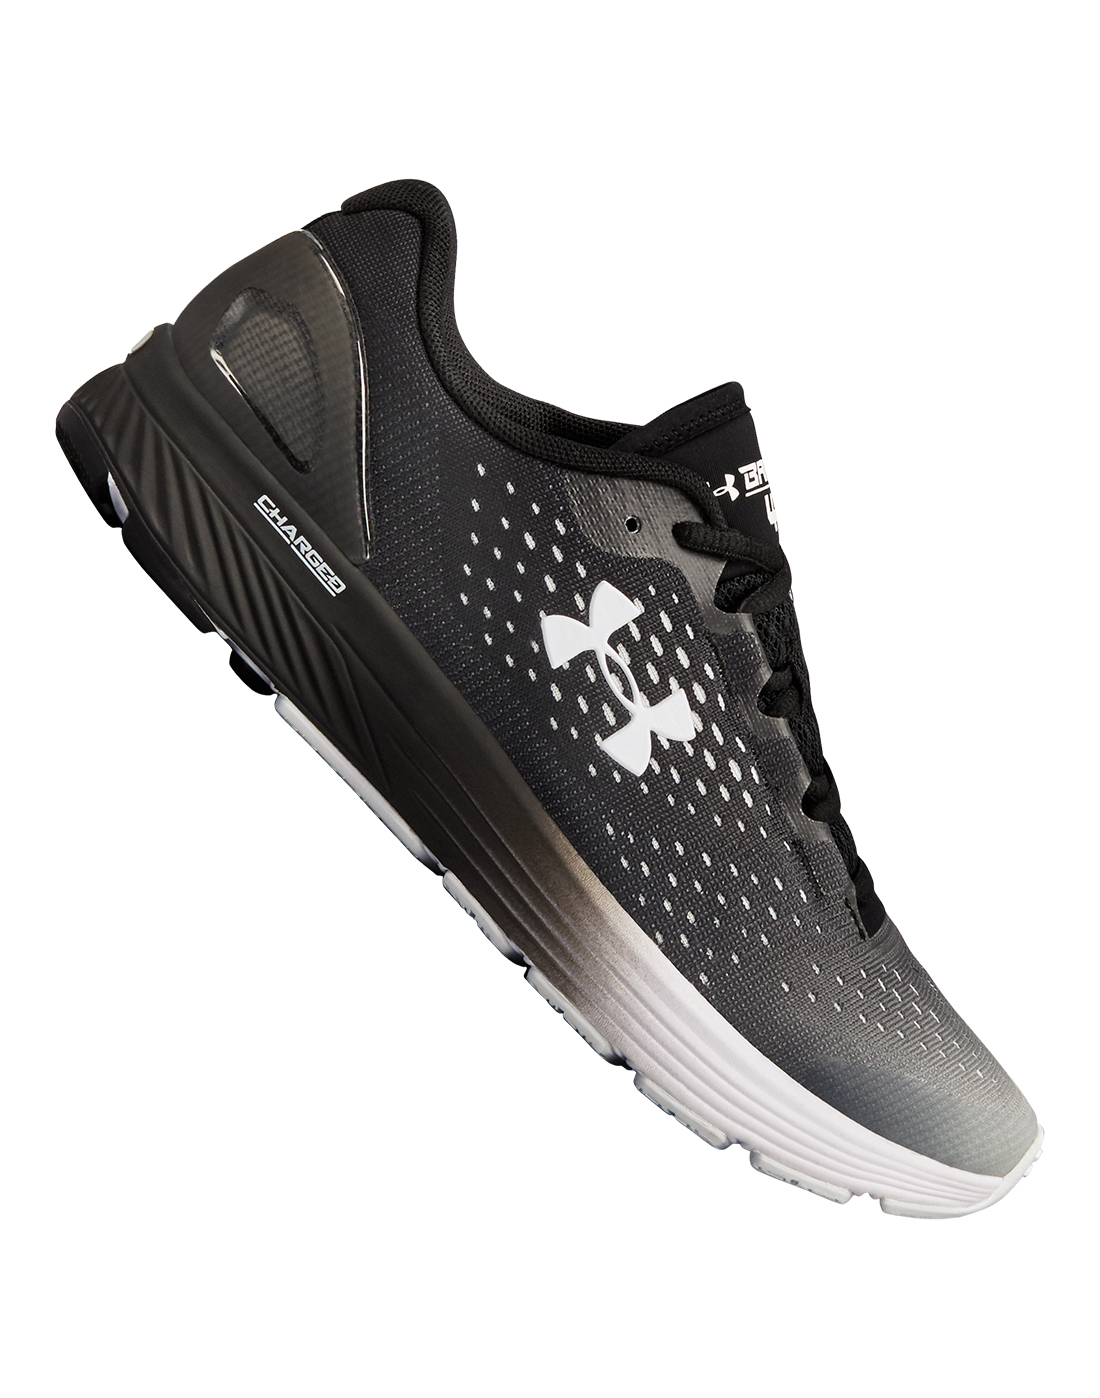 Under Armour Womens Charged Bandit - Black | Life Style Sports UK